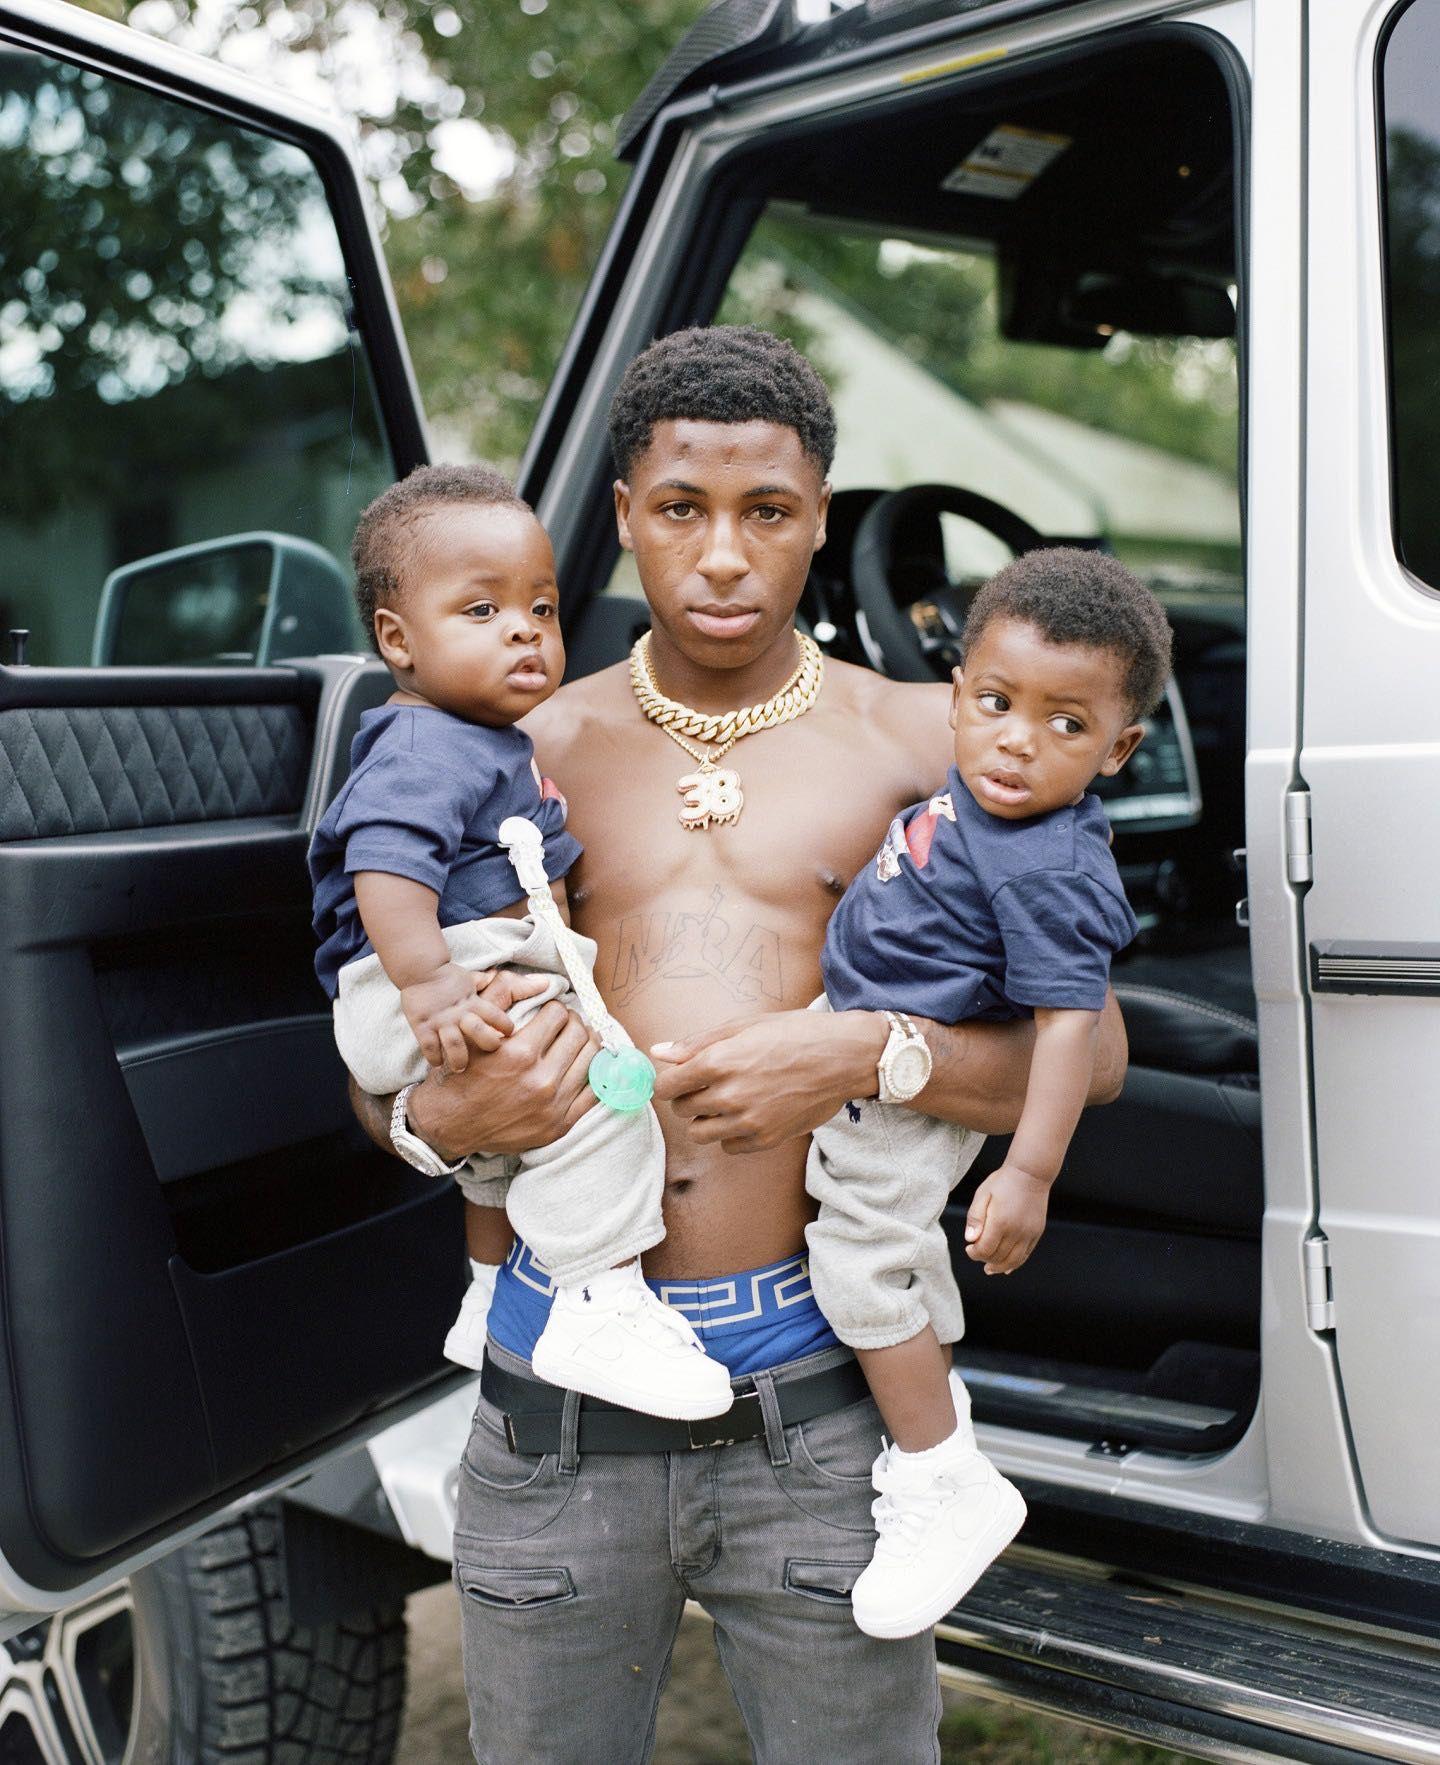 Download NBA YoungBoy 38 Baby Wallpaper Free 